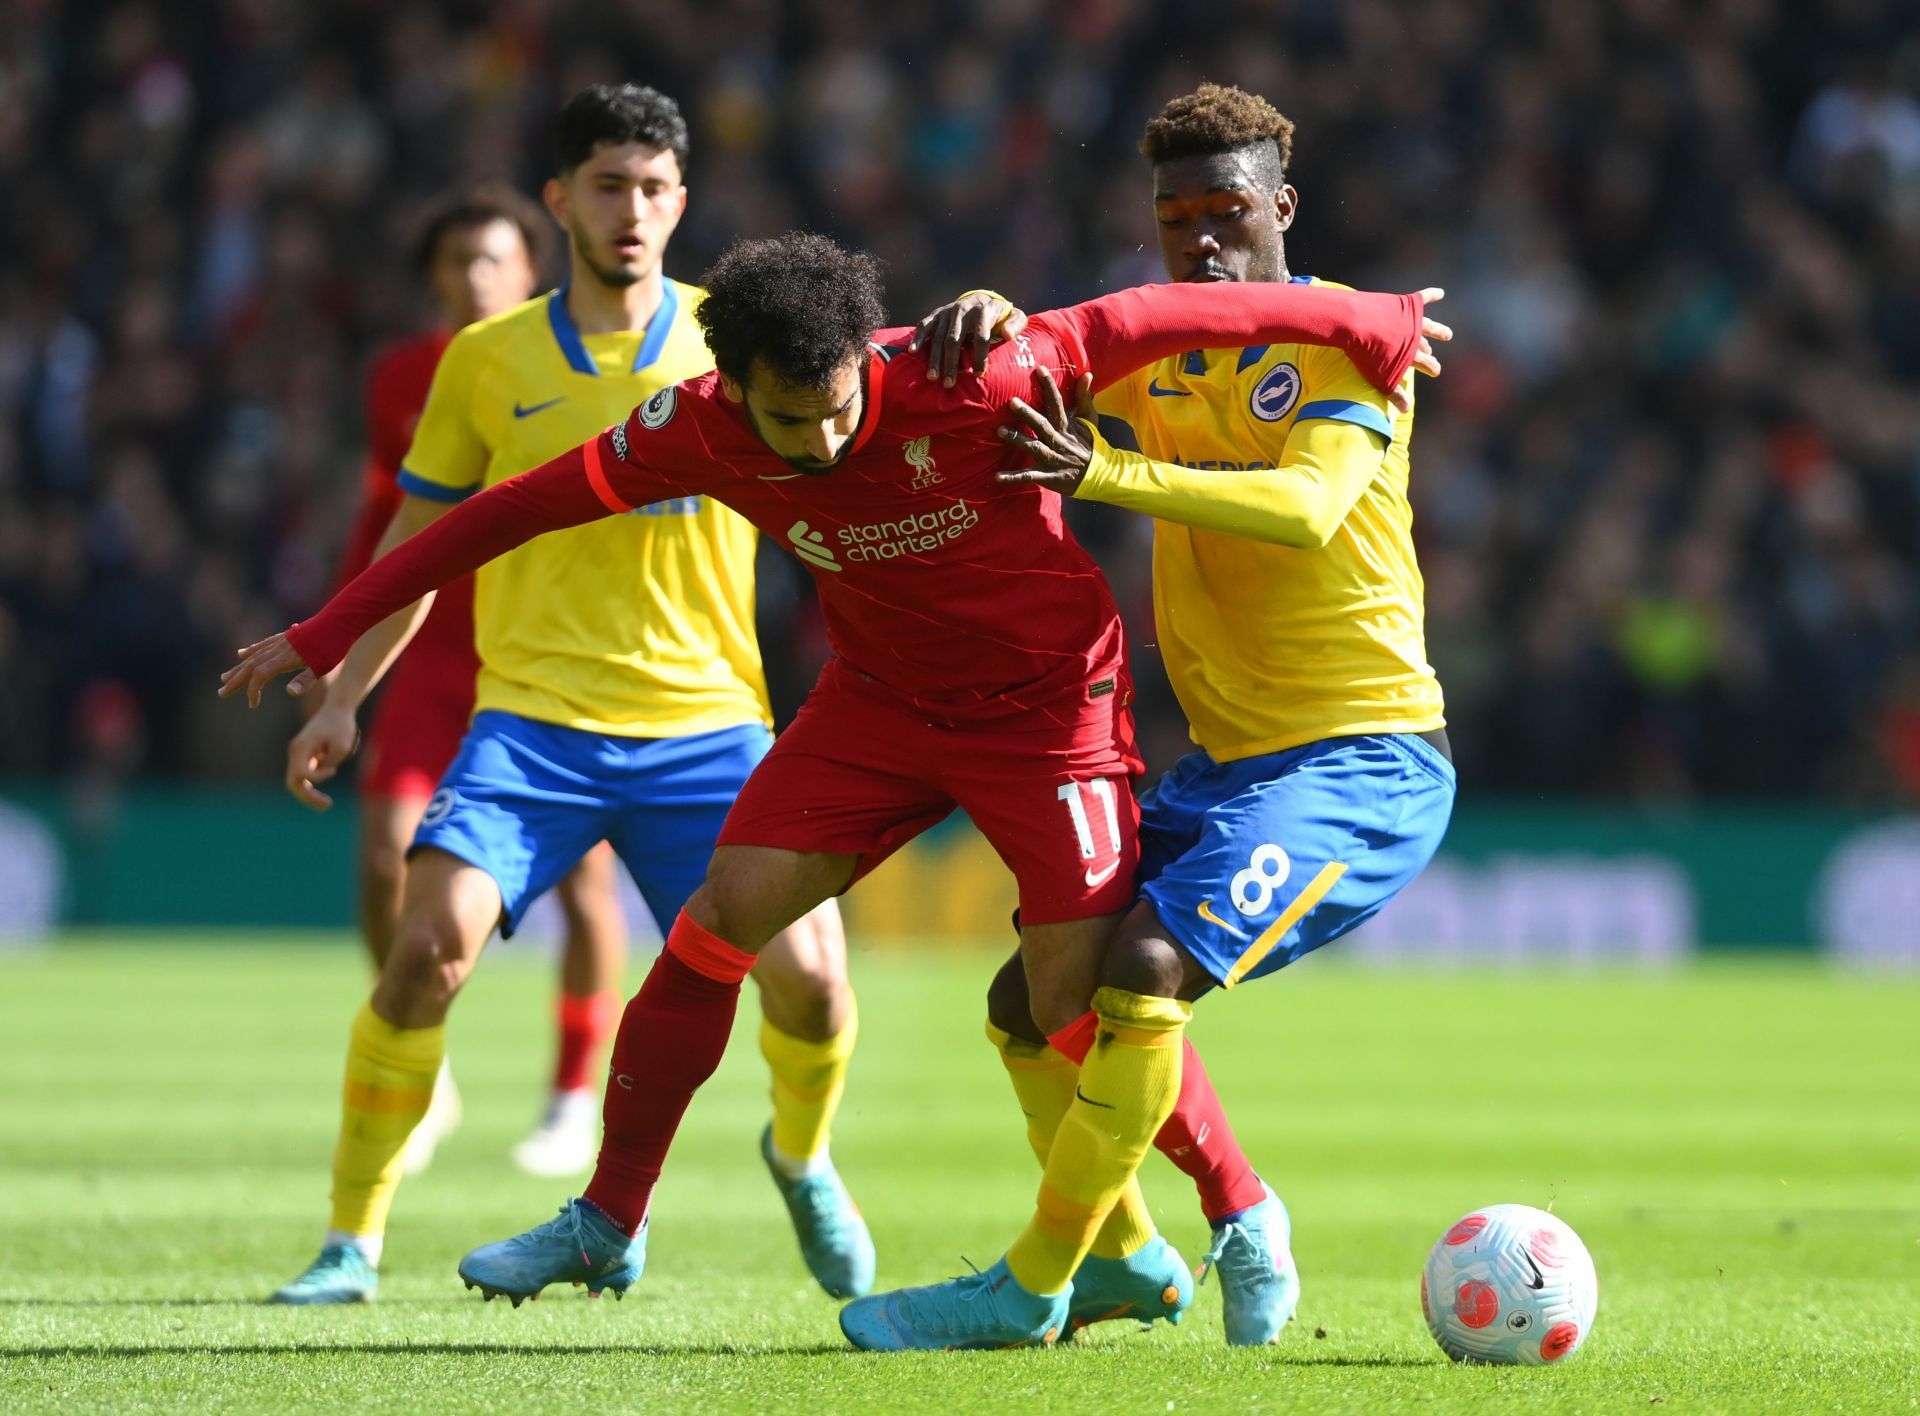 Mohamed Salah tussles it out against Yves Bissouma